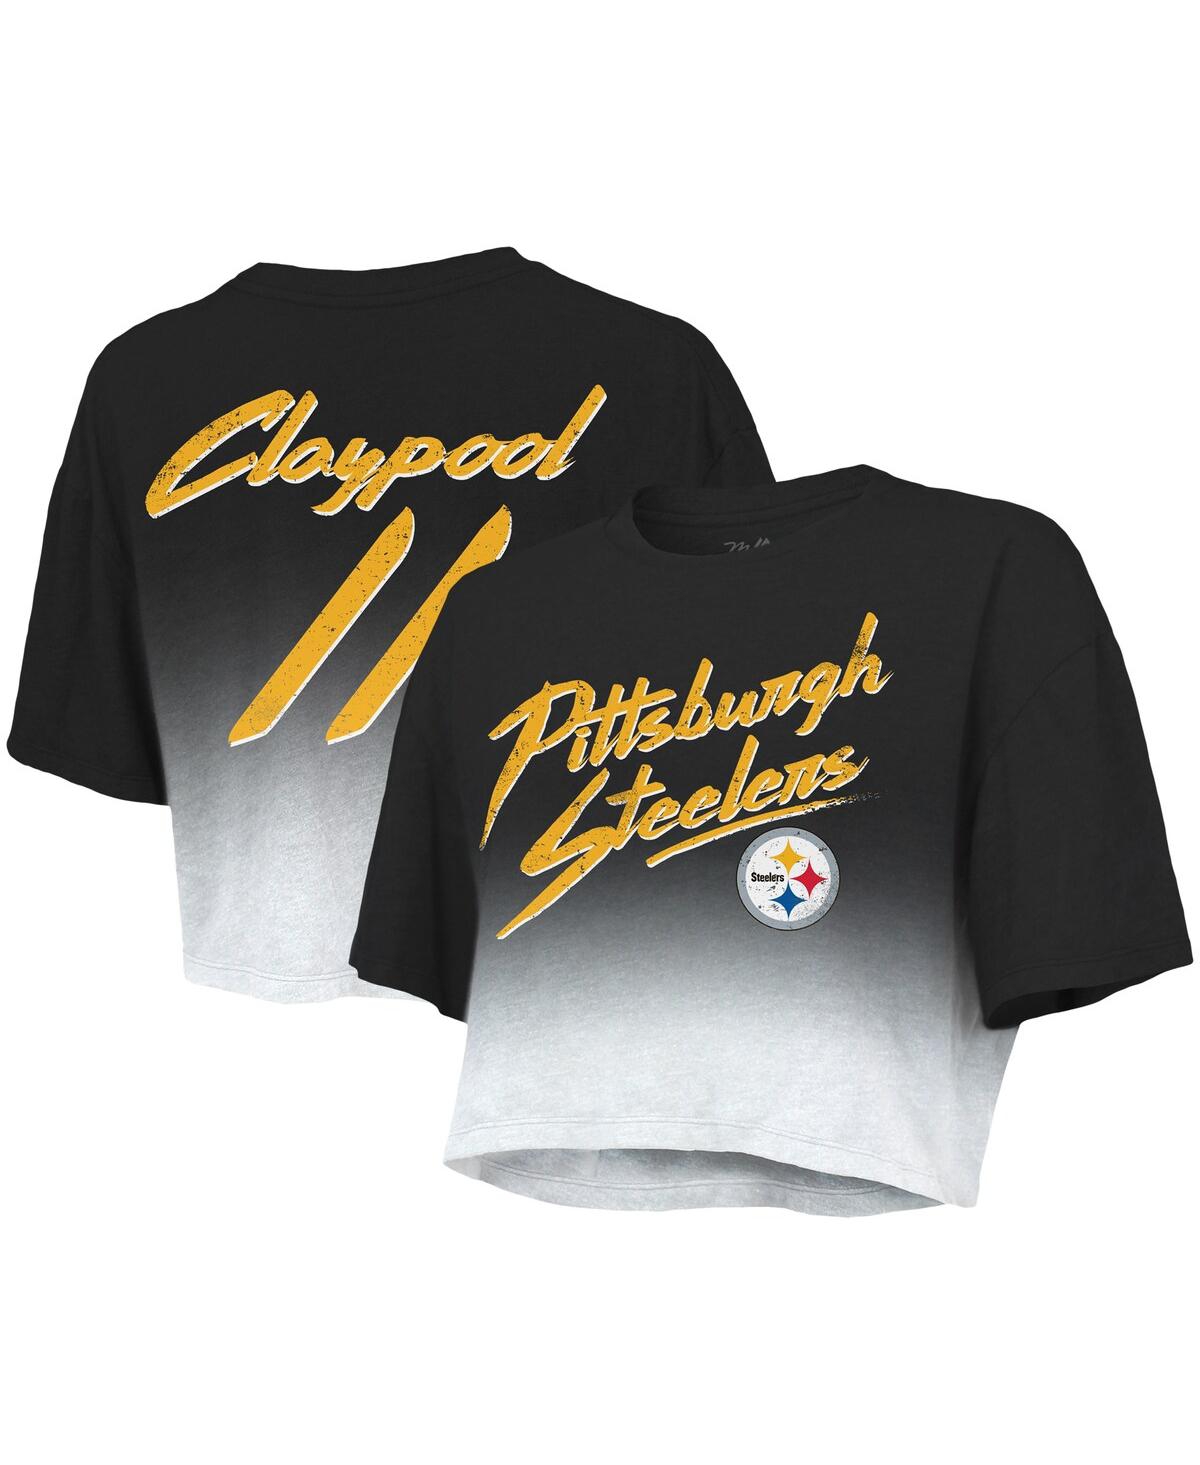 Women's Majestic Threads Chase Claypool Black, White Pittsburgh Steelers Drip-Dye Player Name and Number Tri-Blend Crop T-shirt - Black, White